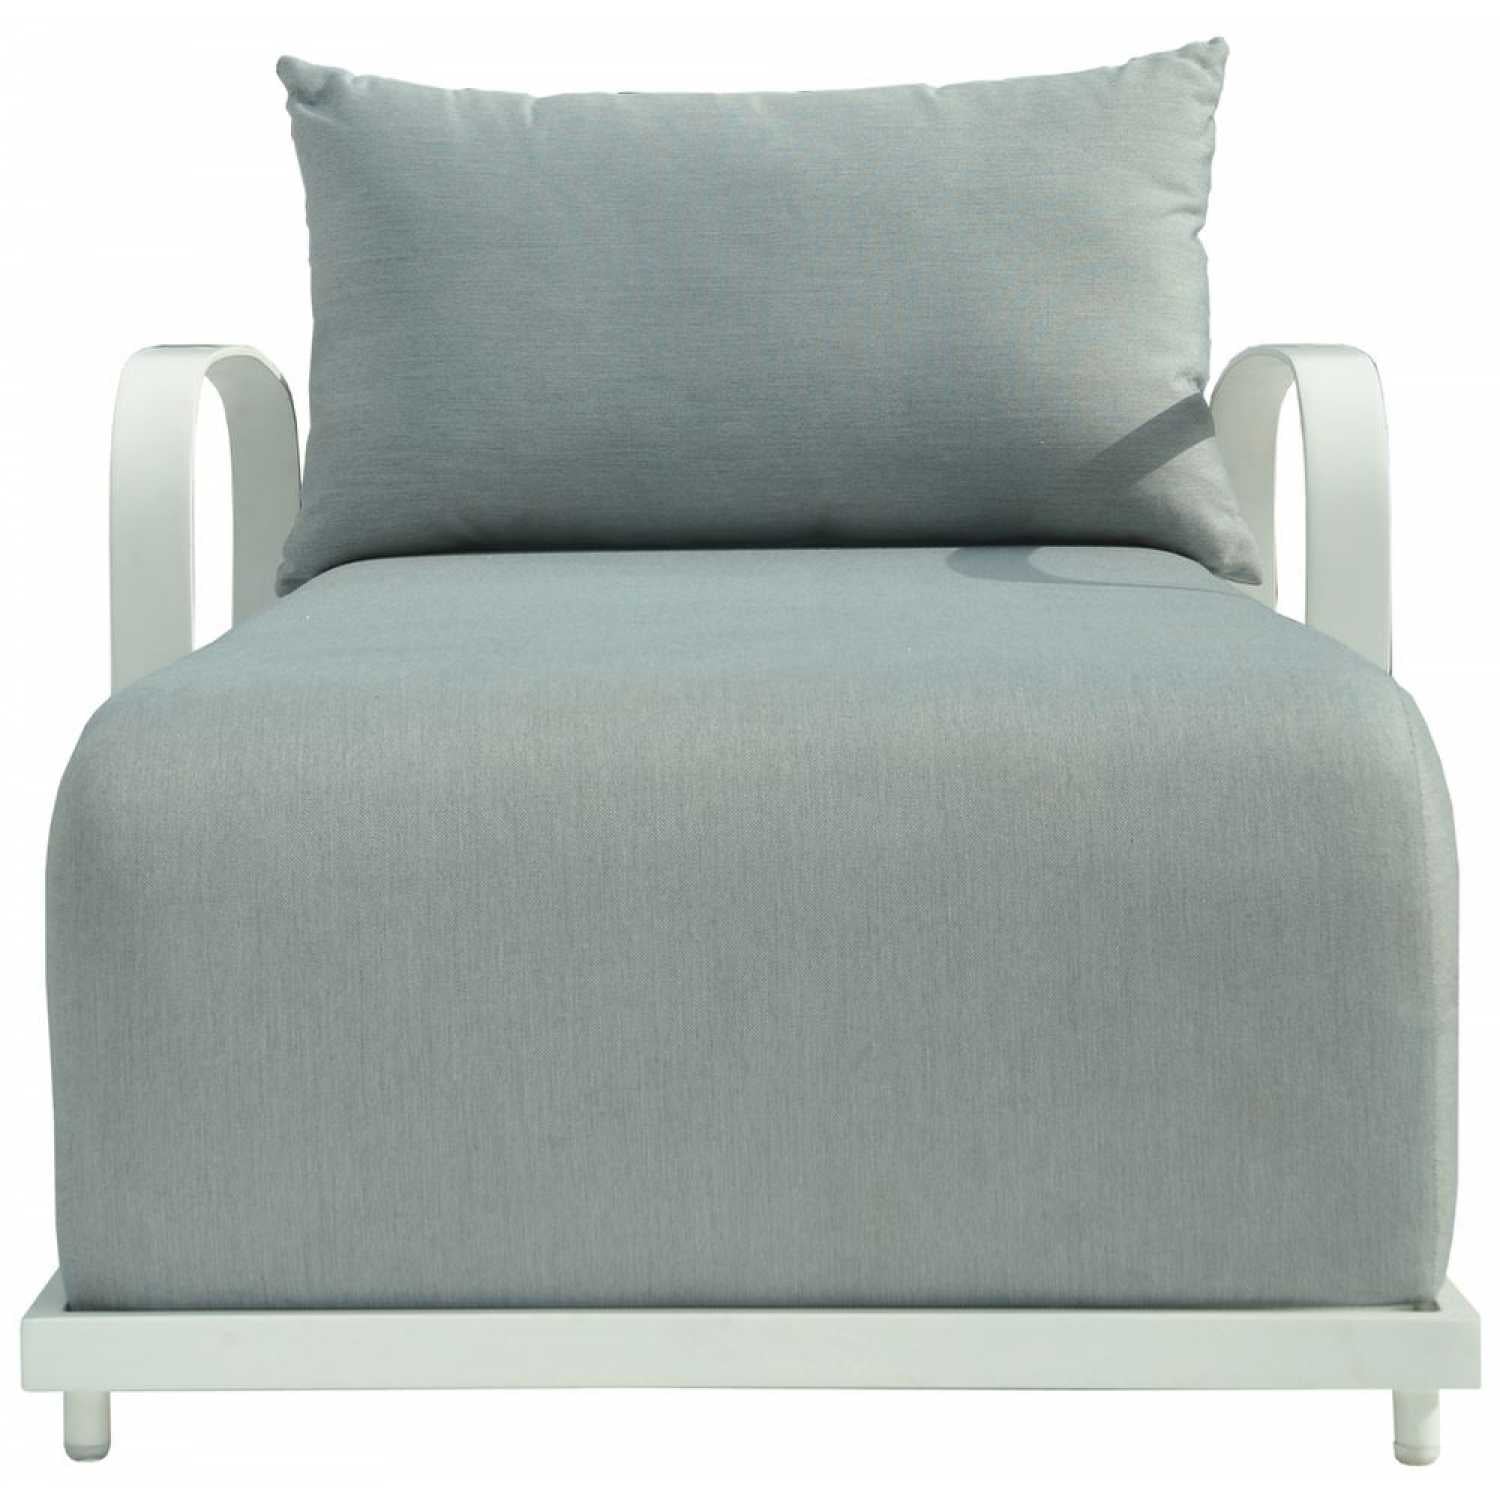 Windsor White Chaise - PadioLiving - Windsor White Chaise - Outdoor Chaise - PadioLiving